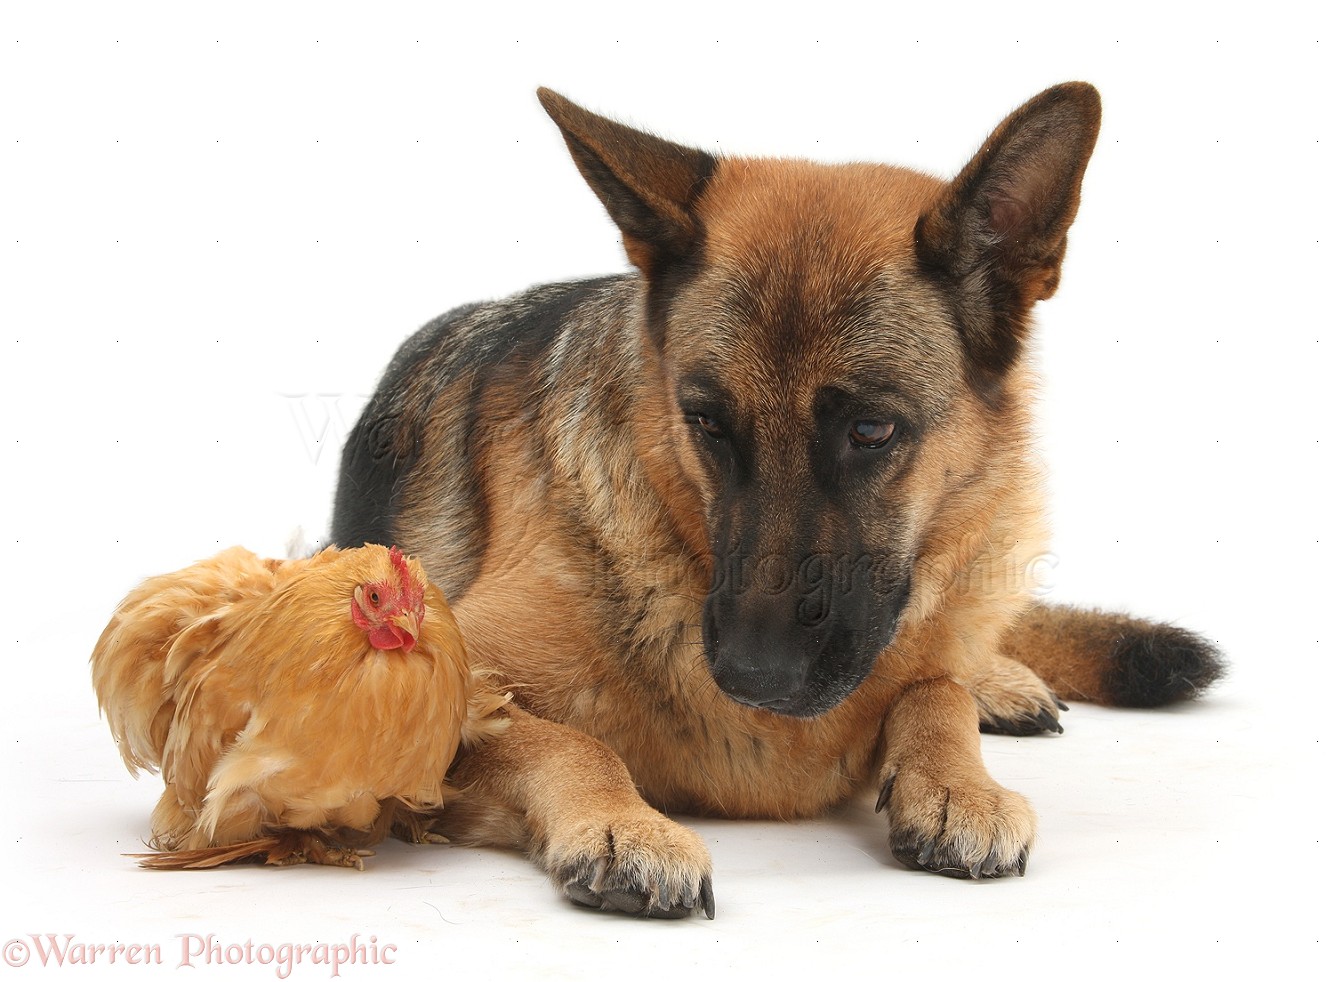 are german shepard dogs good with chickens